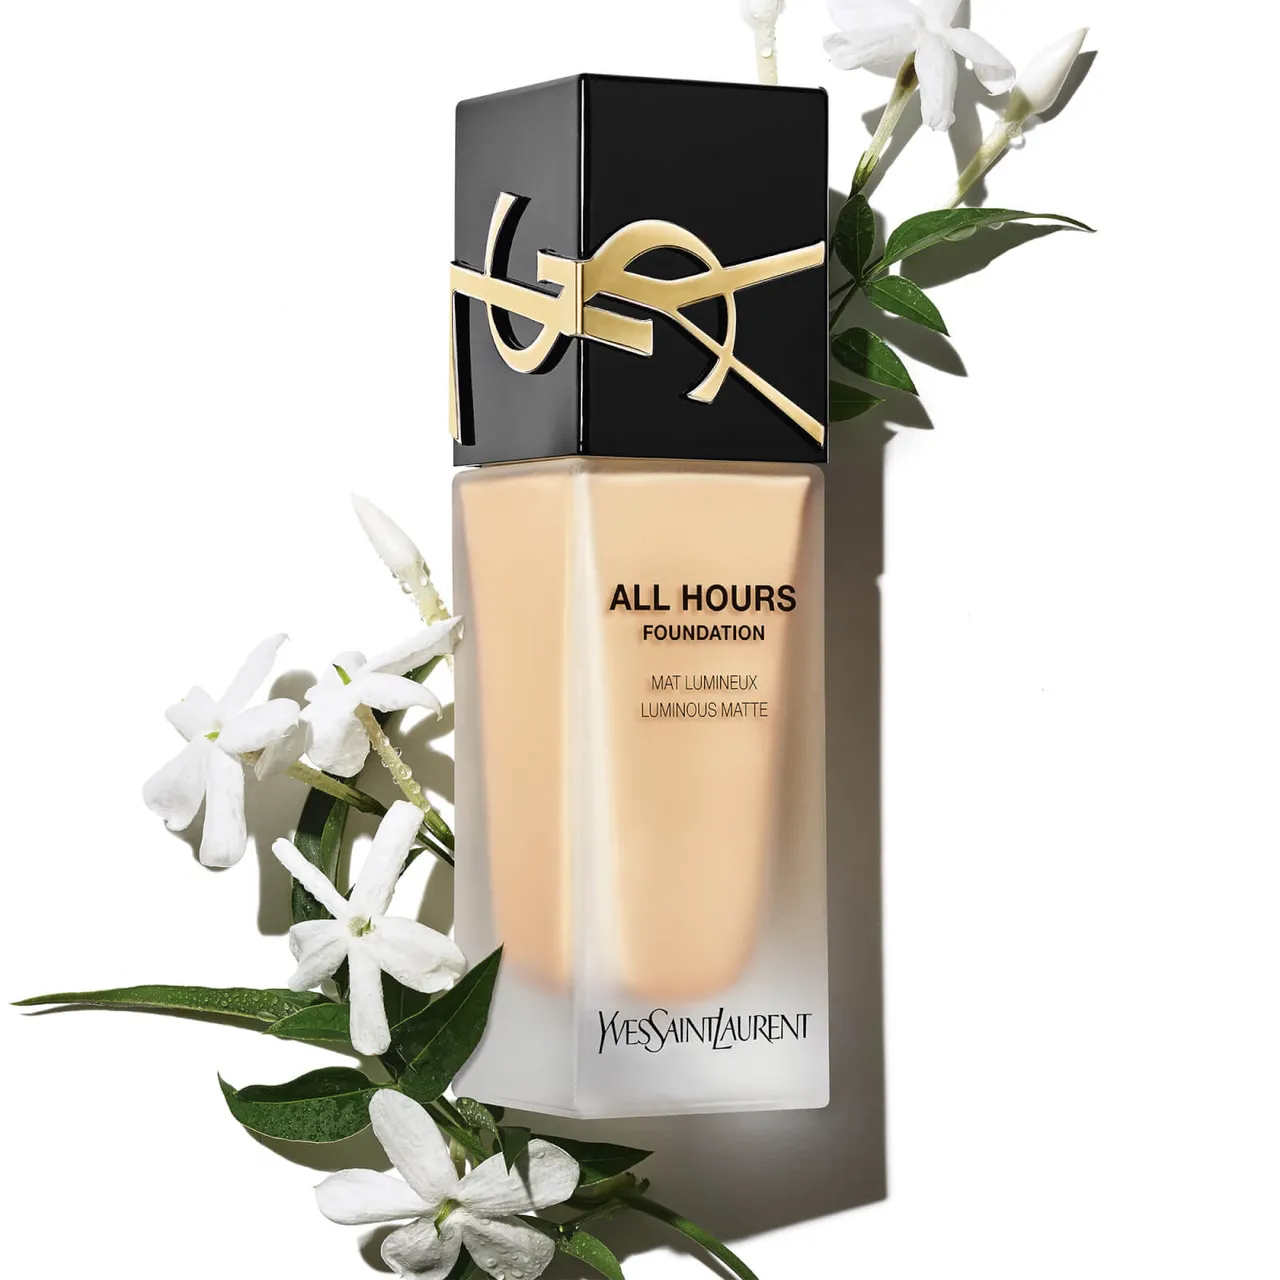 Yves Saint Laurent All Hours Luminous Matte Foundation with SPF 39 25ml (Various Shades) - LW4